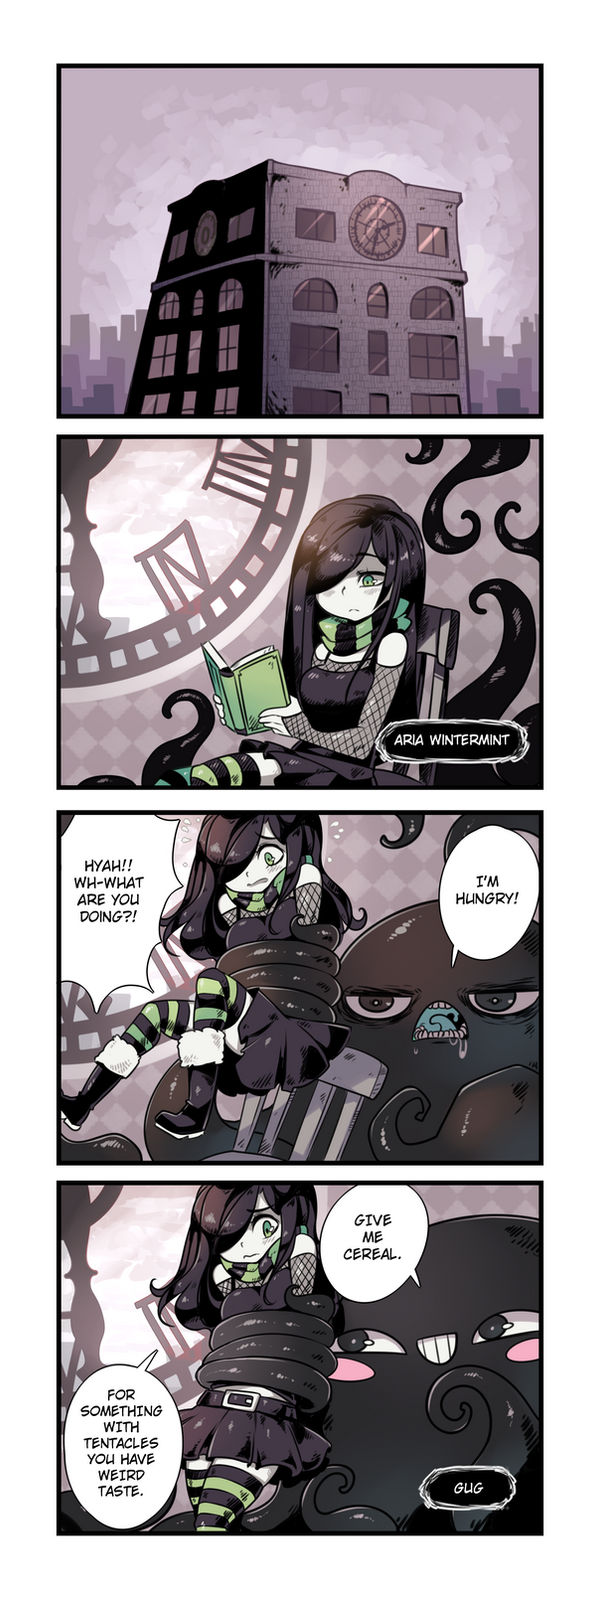 The Crawling City - 1